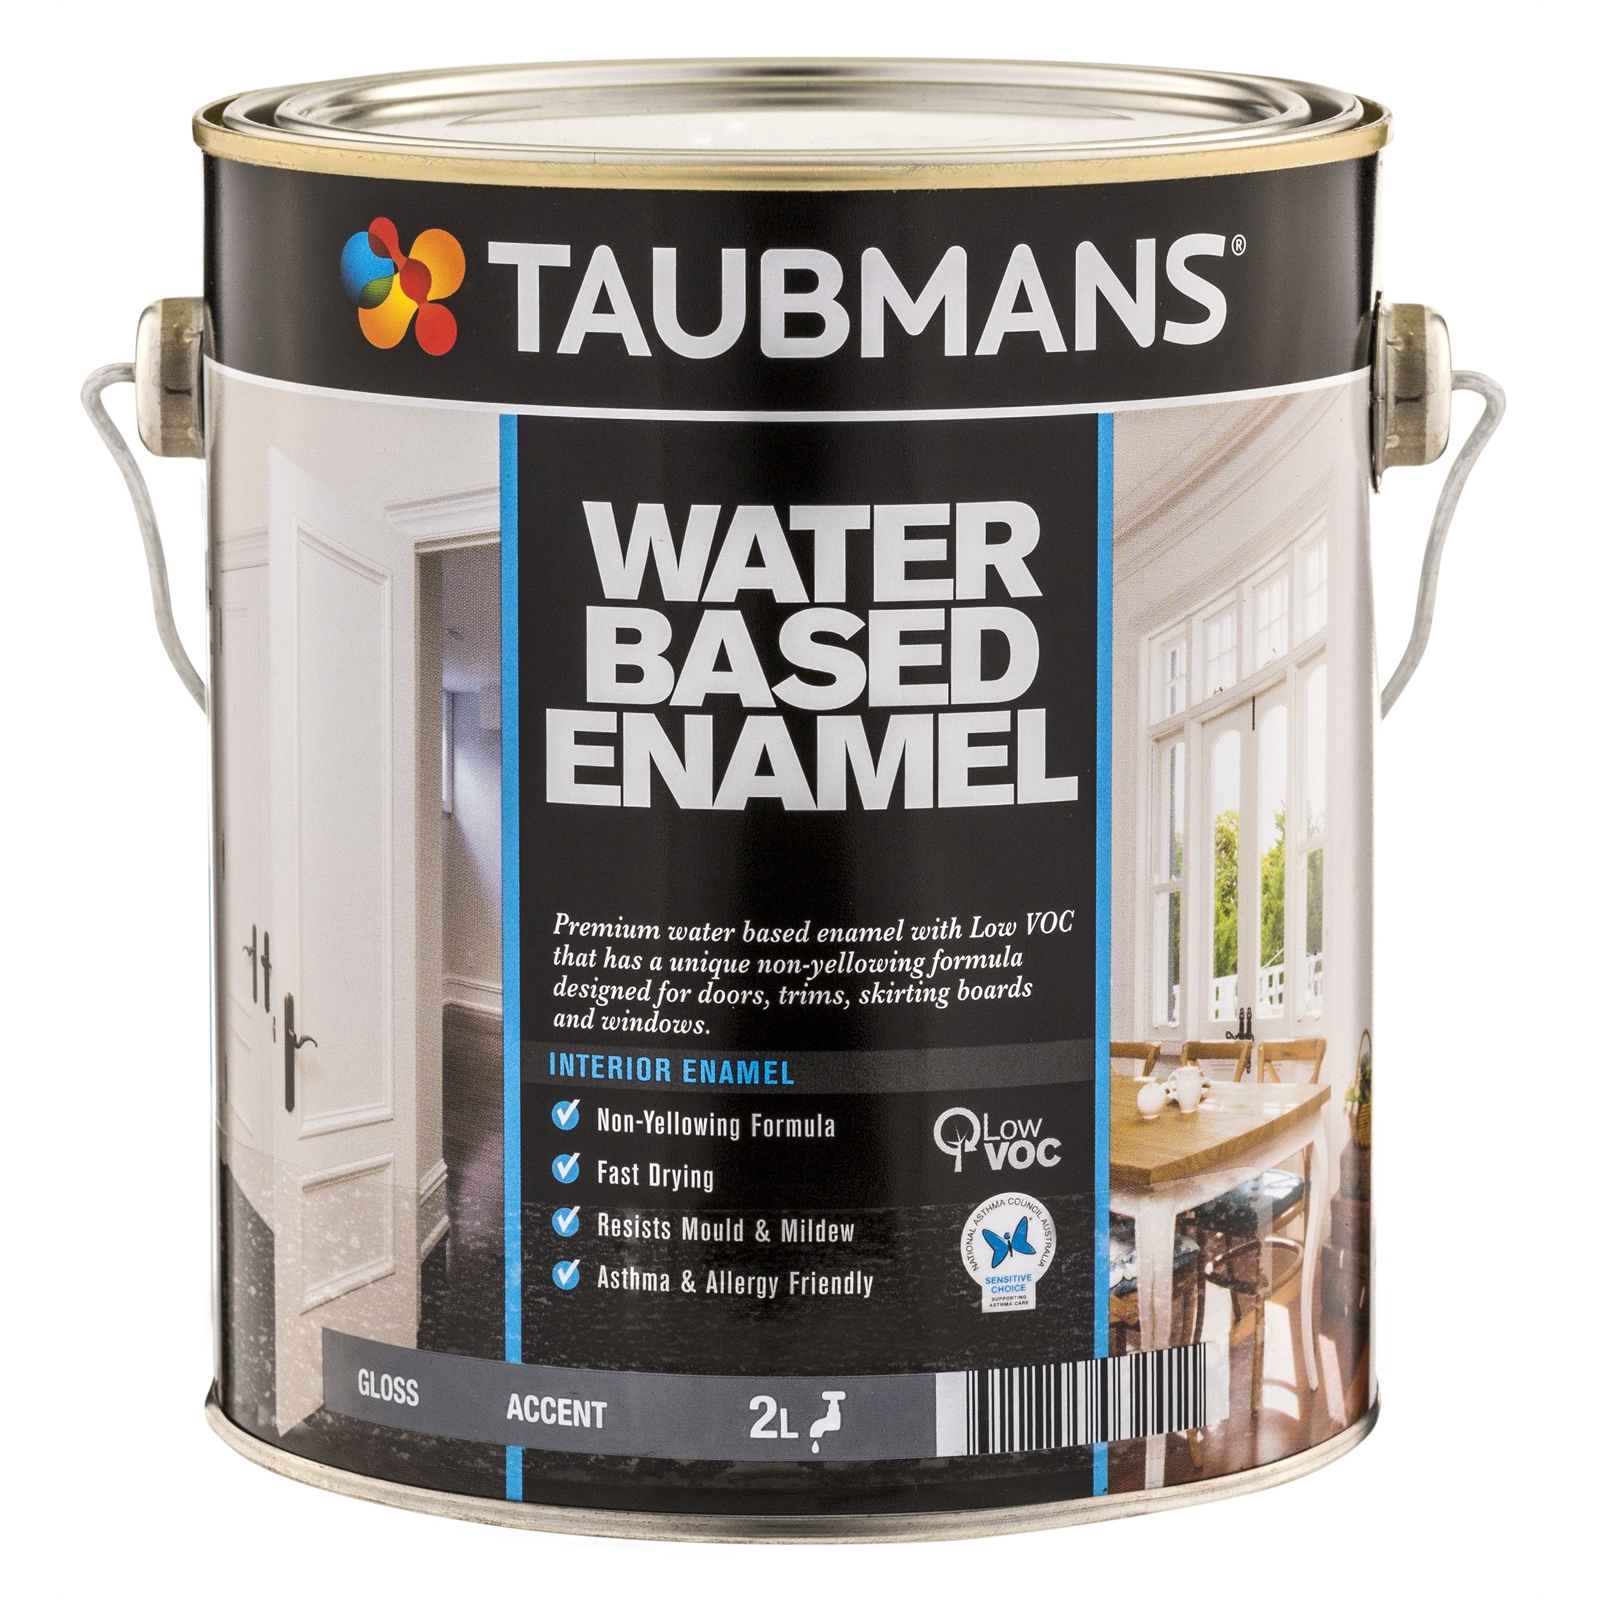 Taubmans 2L Accent Gloss Water Based Enamel